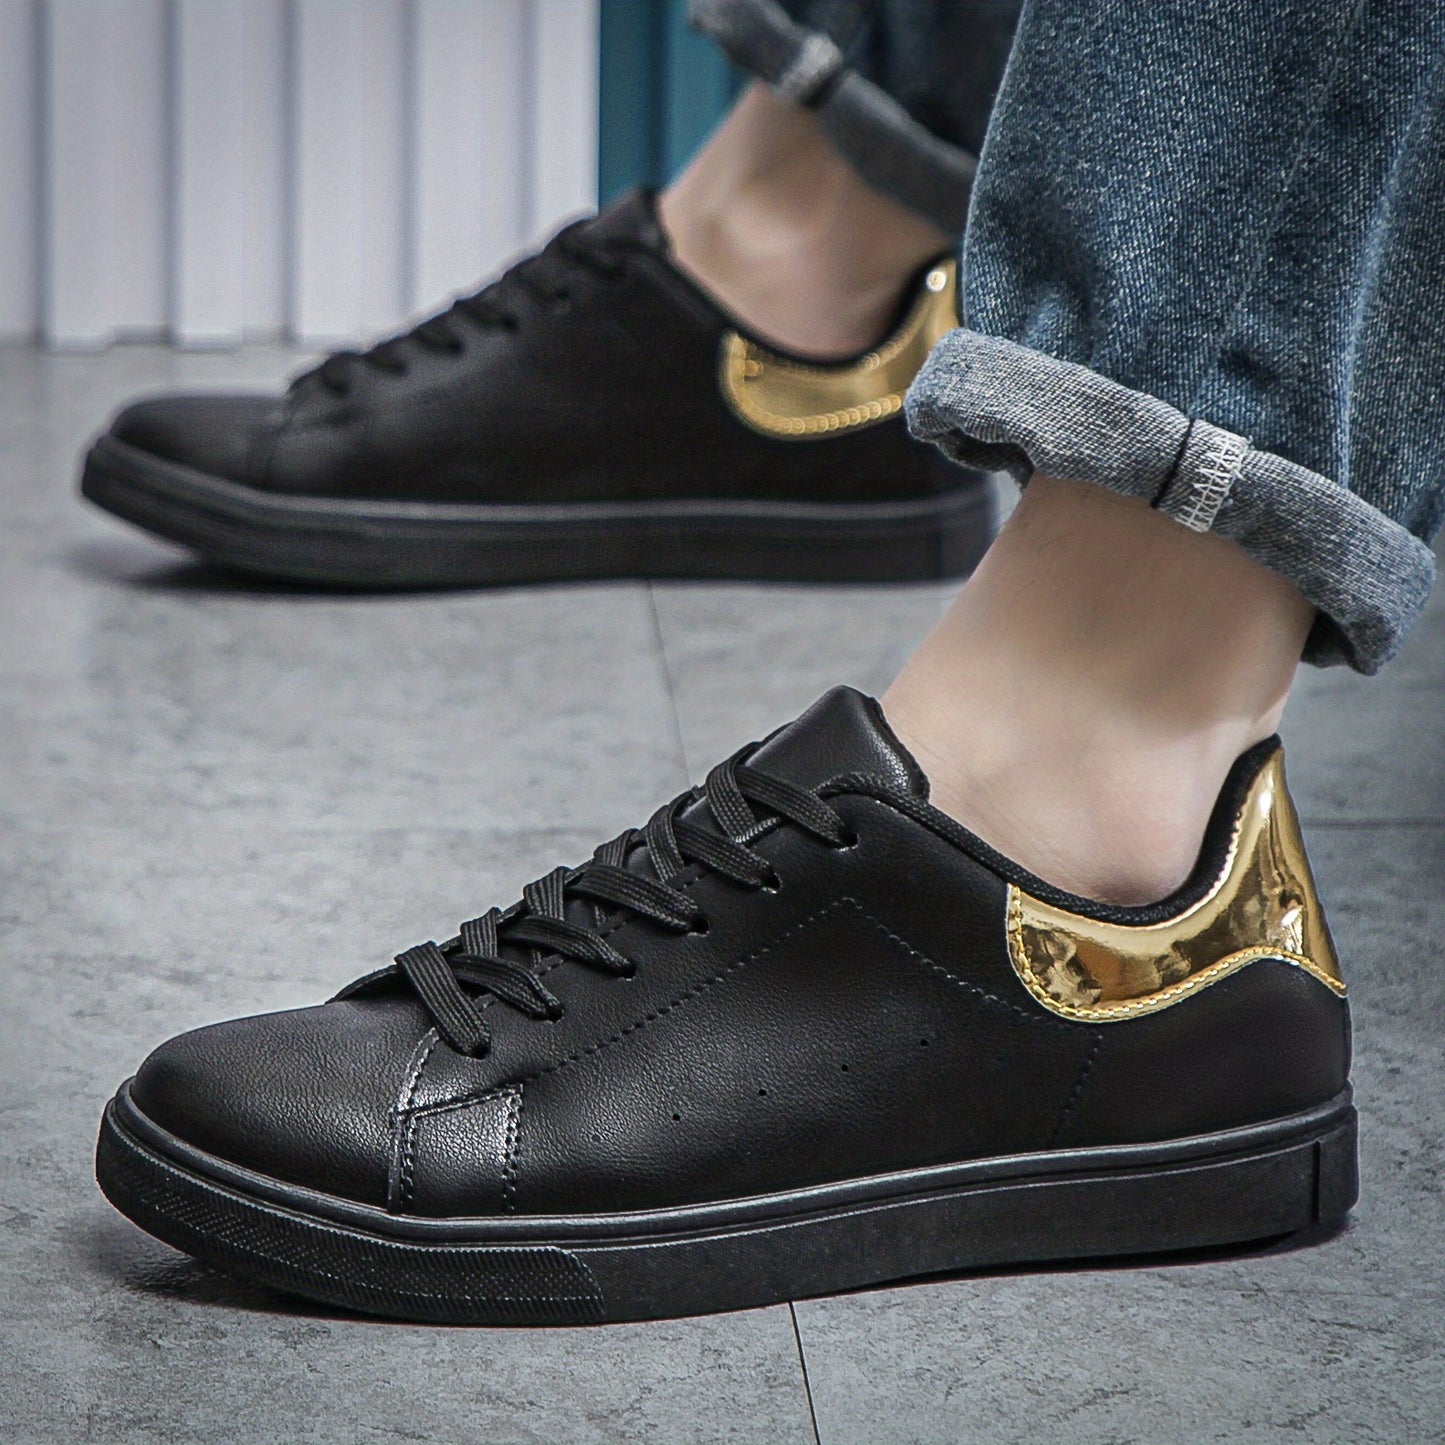 Men's Minimalist Wear-resistant Non-Slip Sneaker For Youth, Spring And Summer